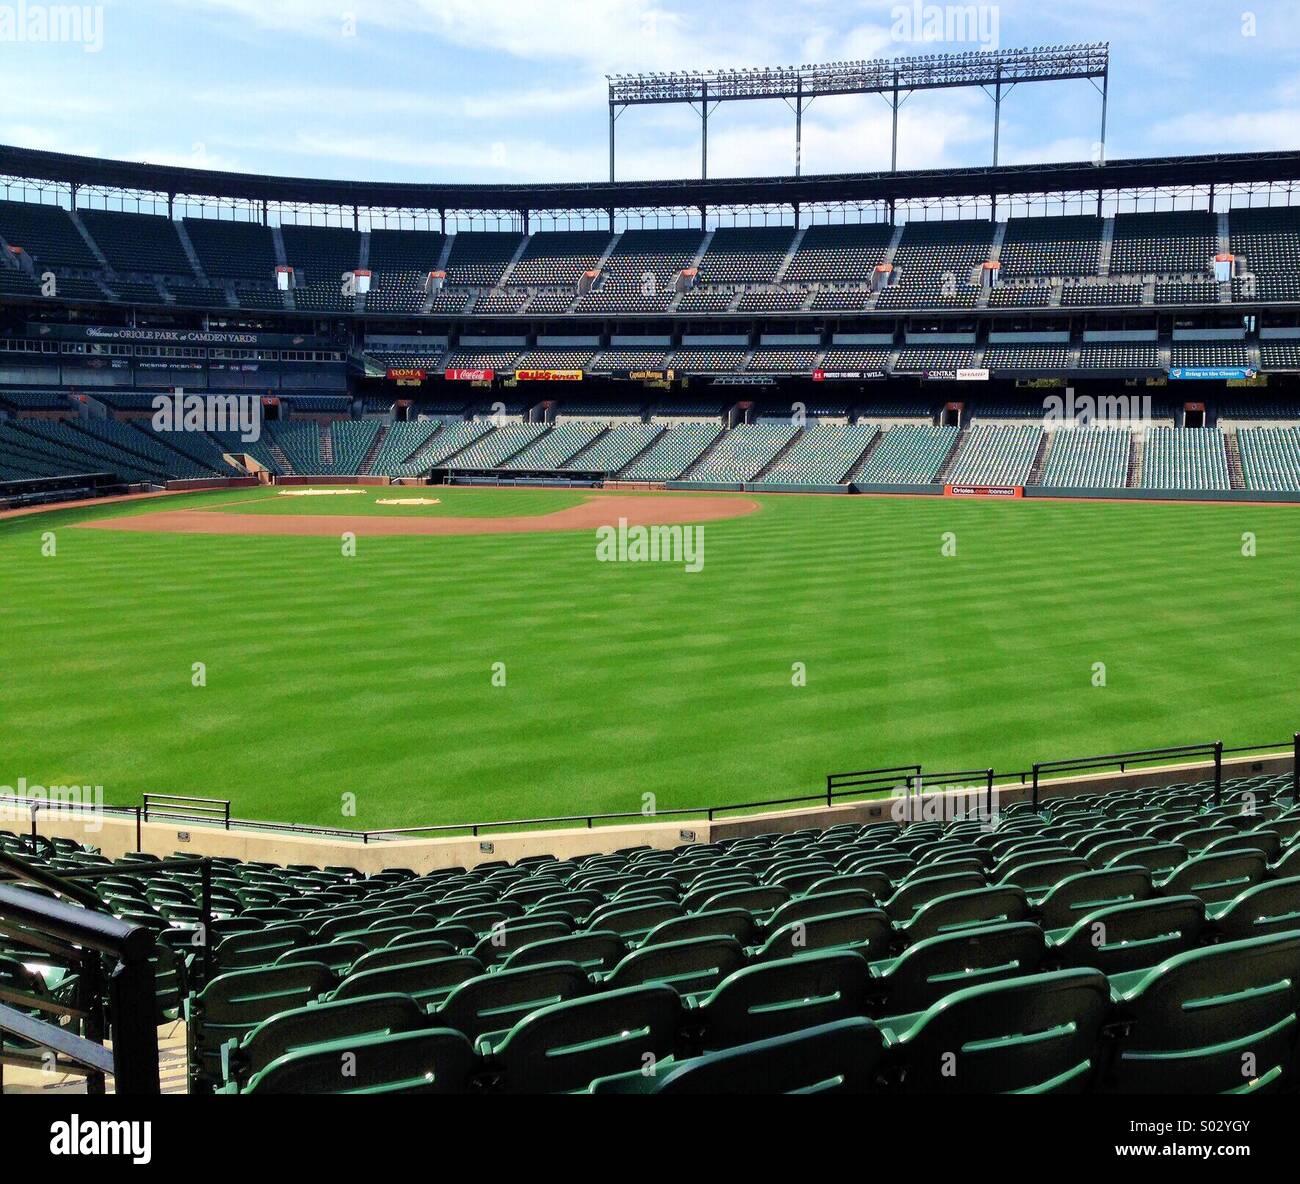 Camden Yards Baltimore Orioles baseball field dans le Maryland, USA. Banque D'Images